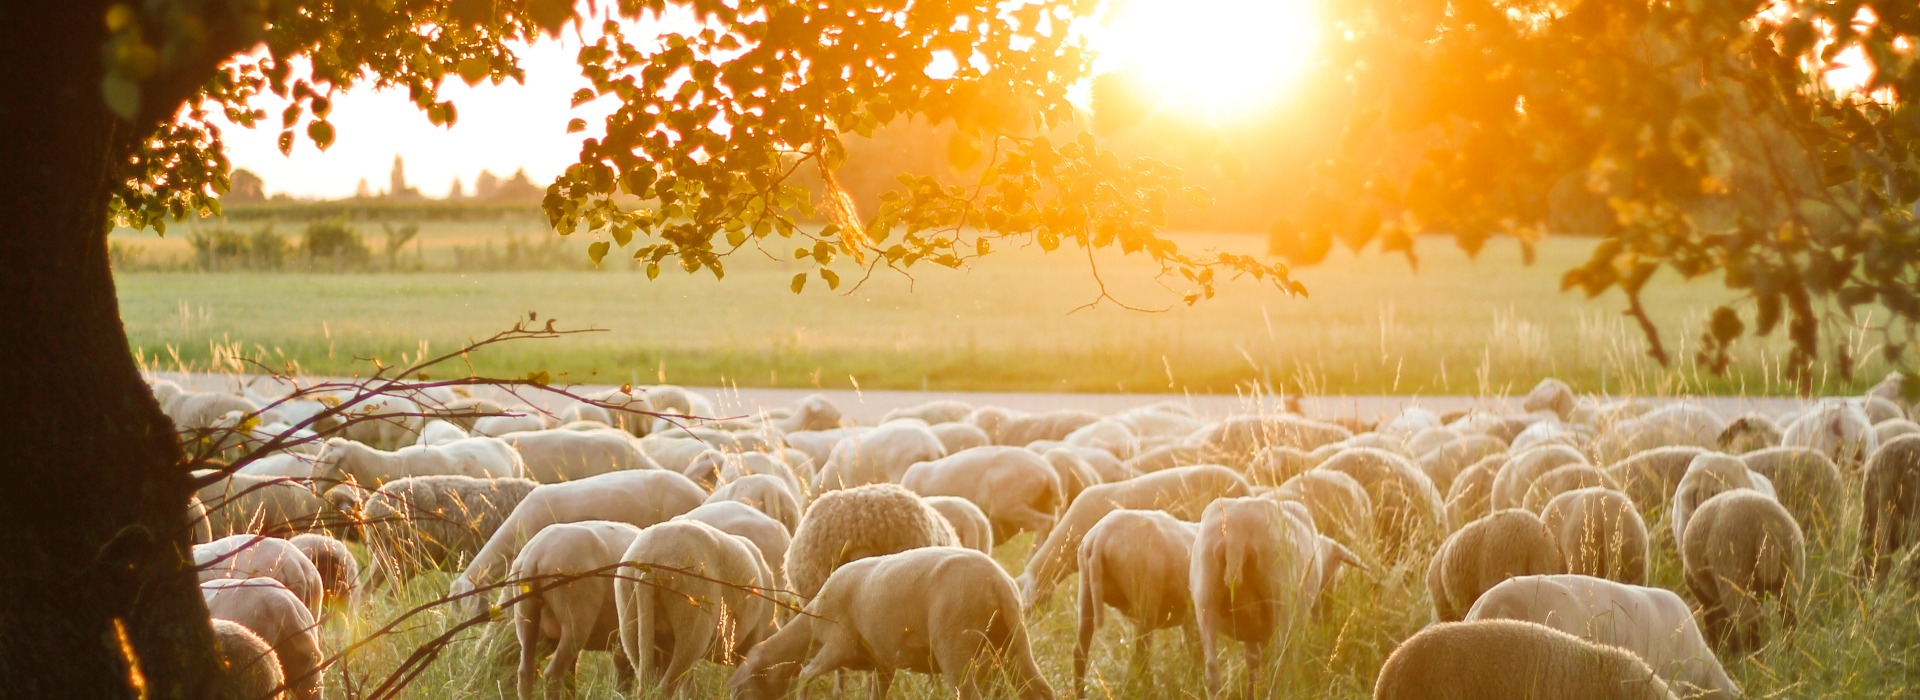 A Flock of sheep grazing on pasture grass during sunset